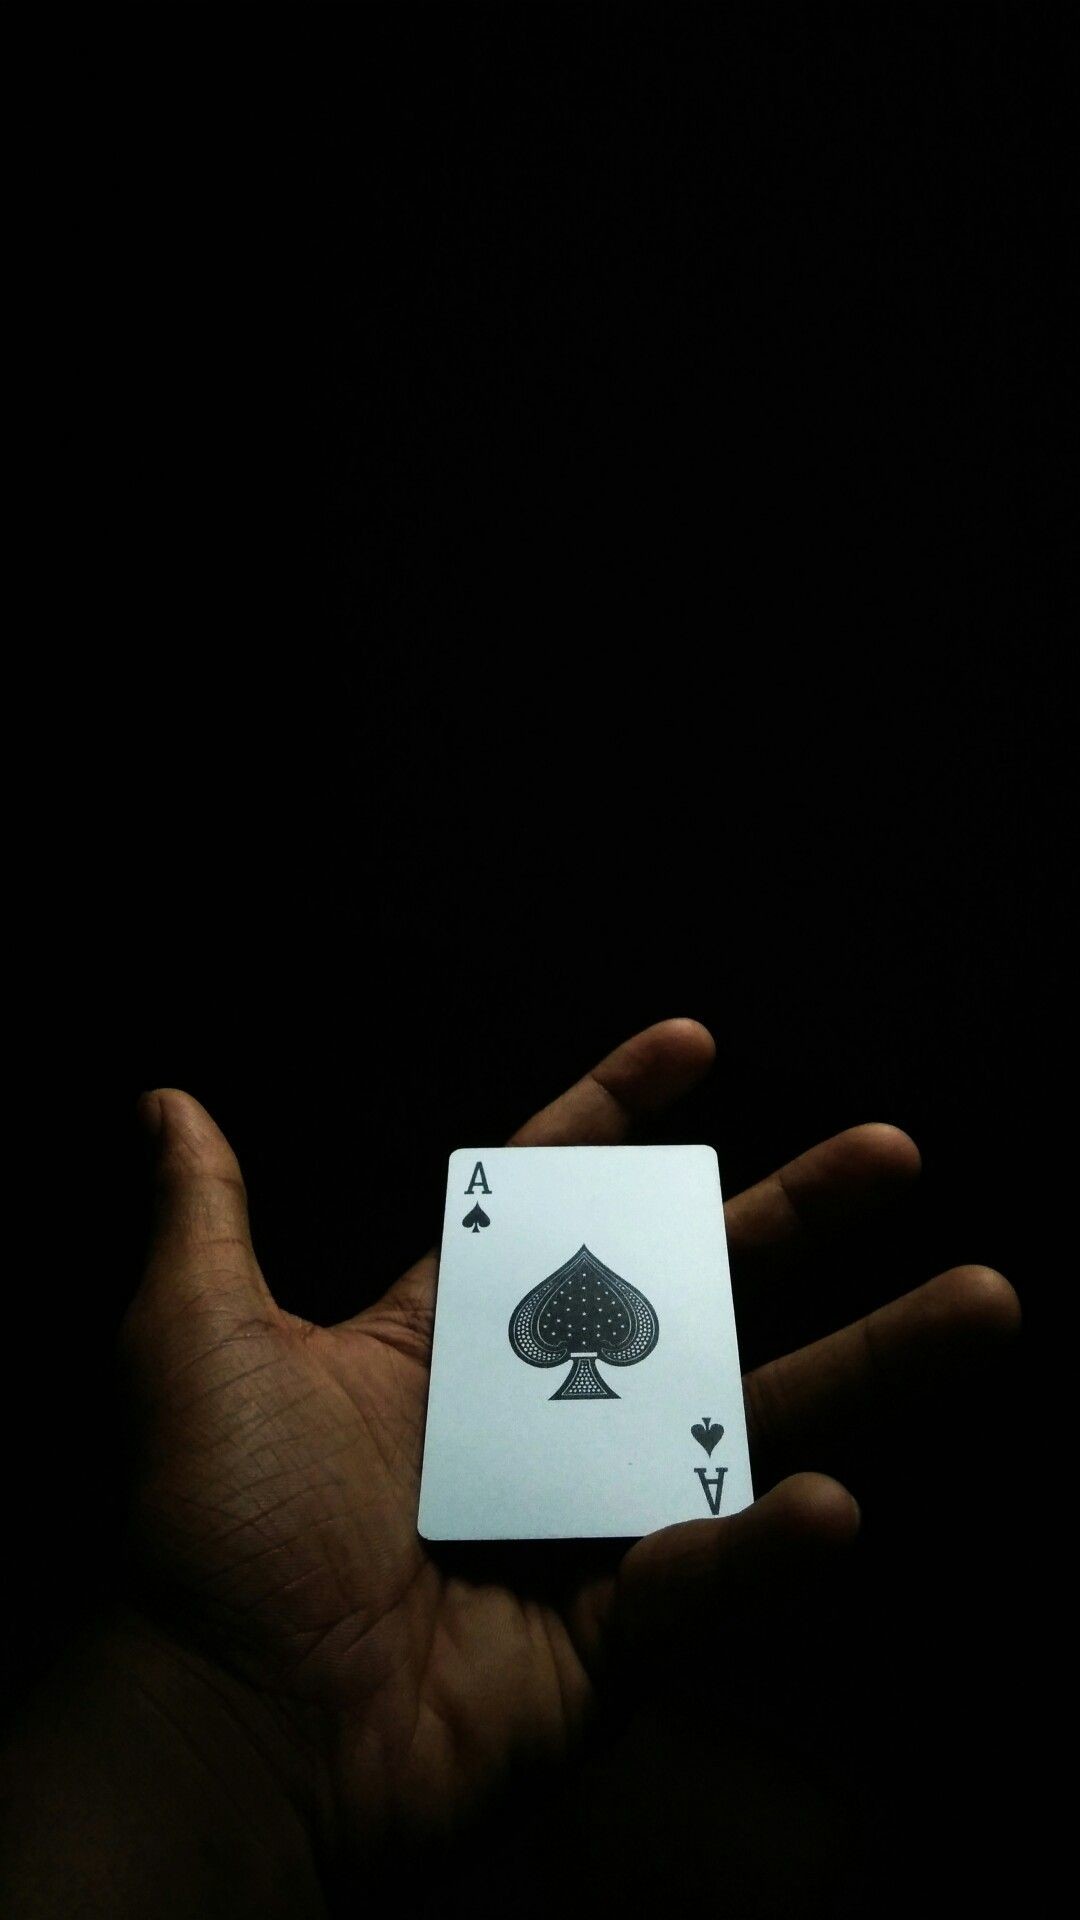 1080x1920 Ace of spades Cardography Card photography Mobilephotography Dark Ace of  spades wallpaper